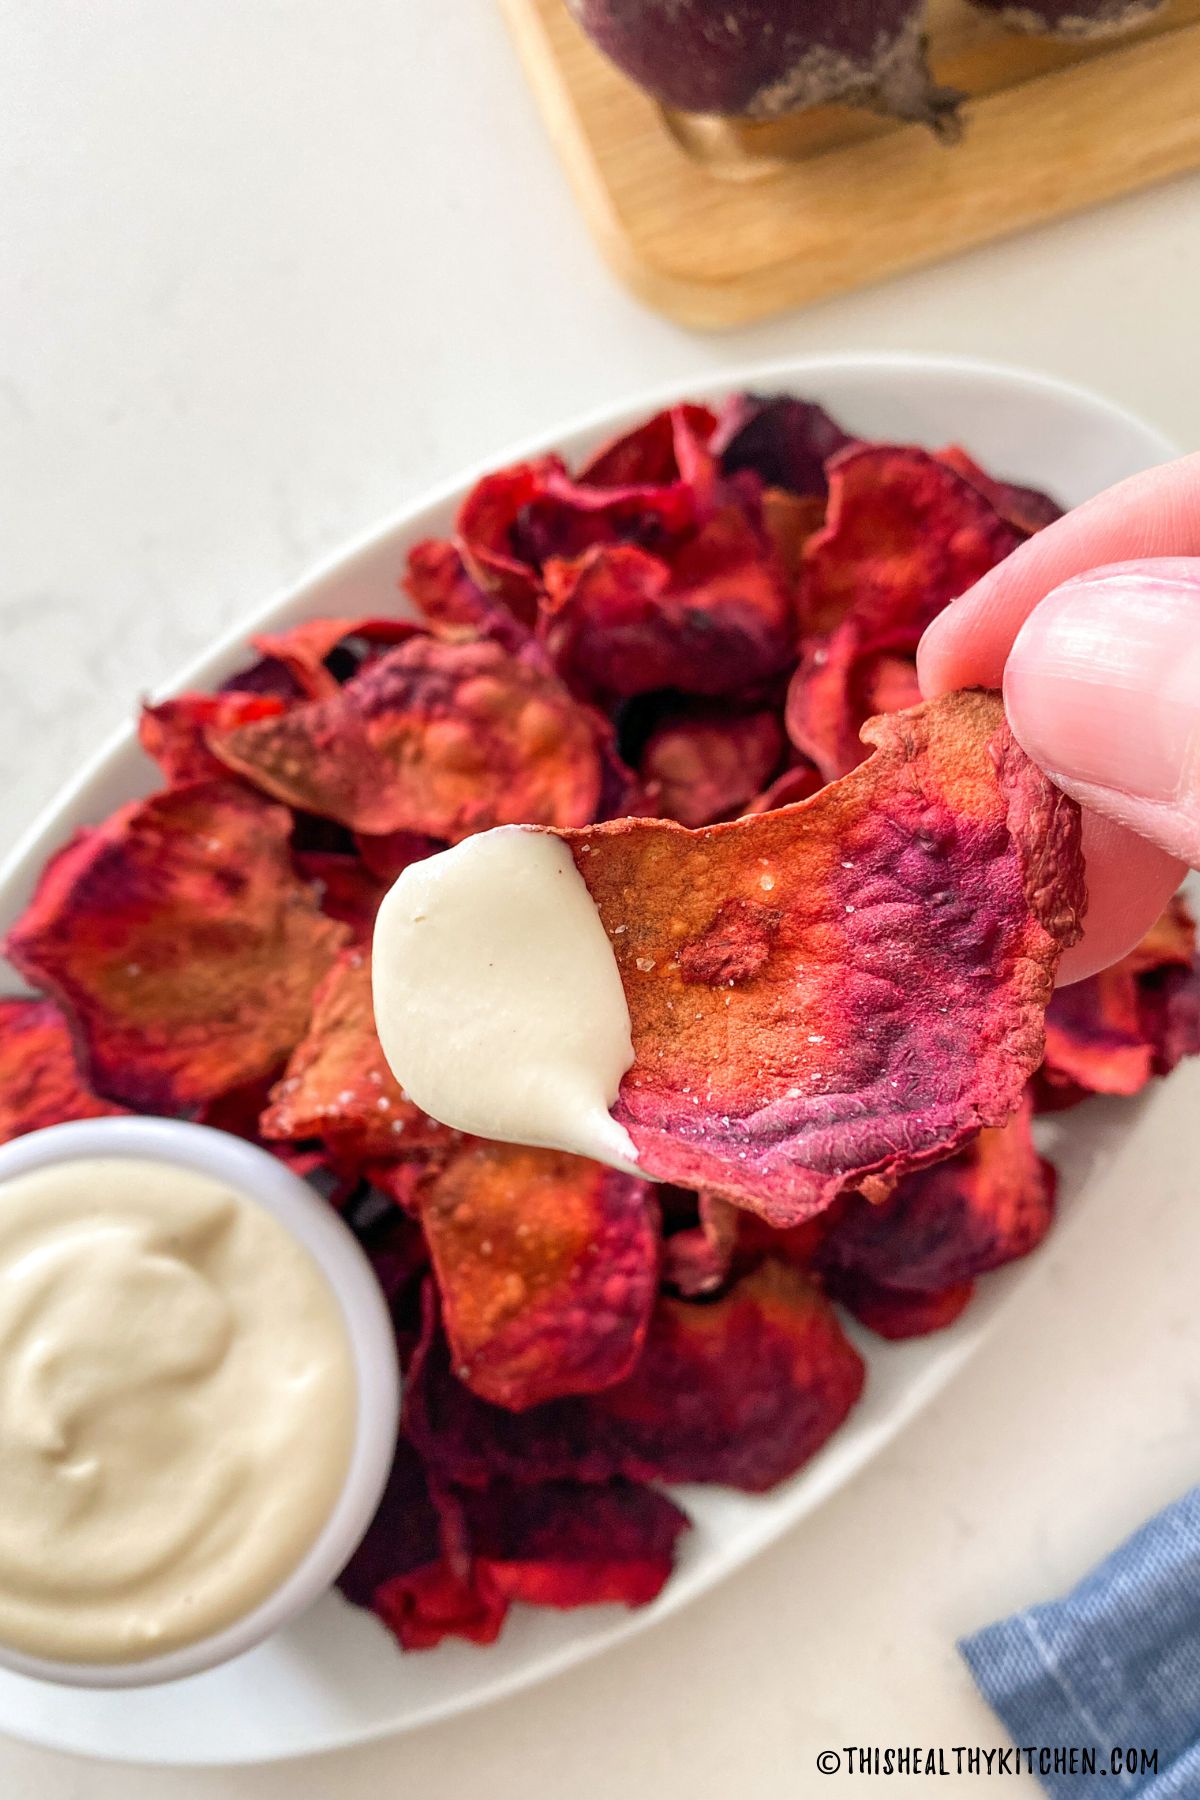 Hand holding up beet chip with white dip on it.